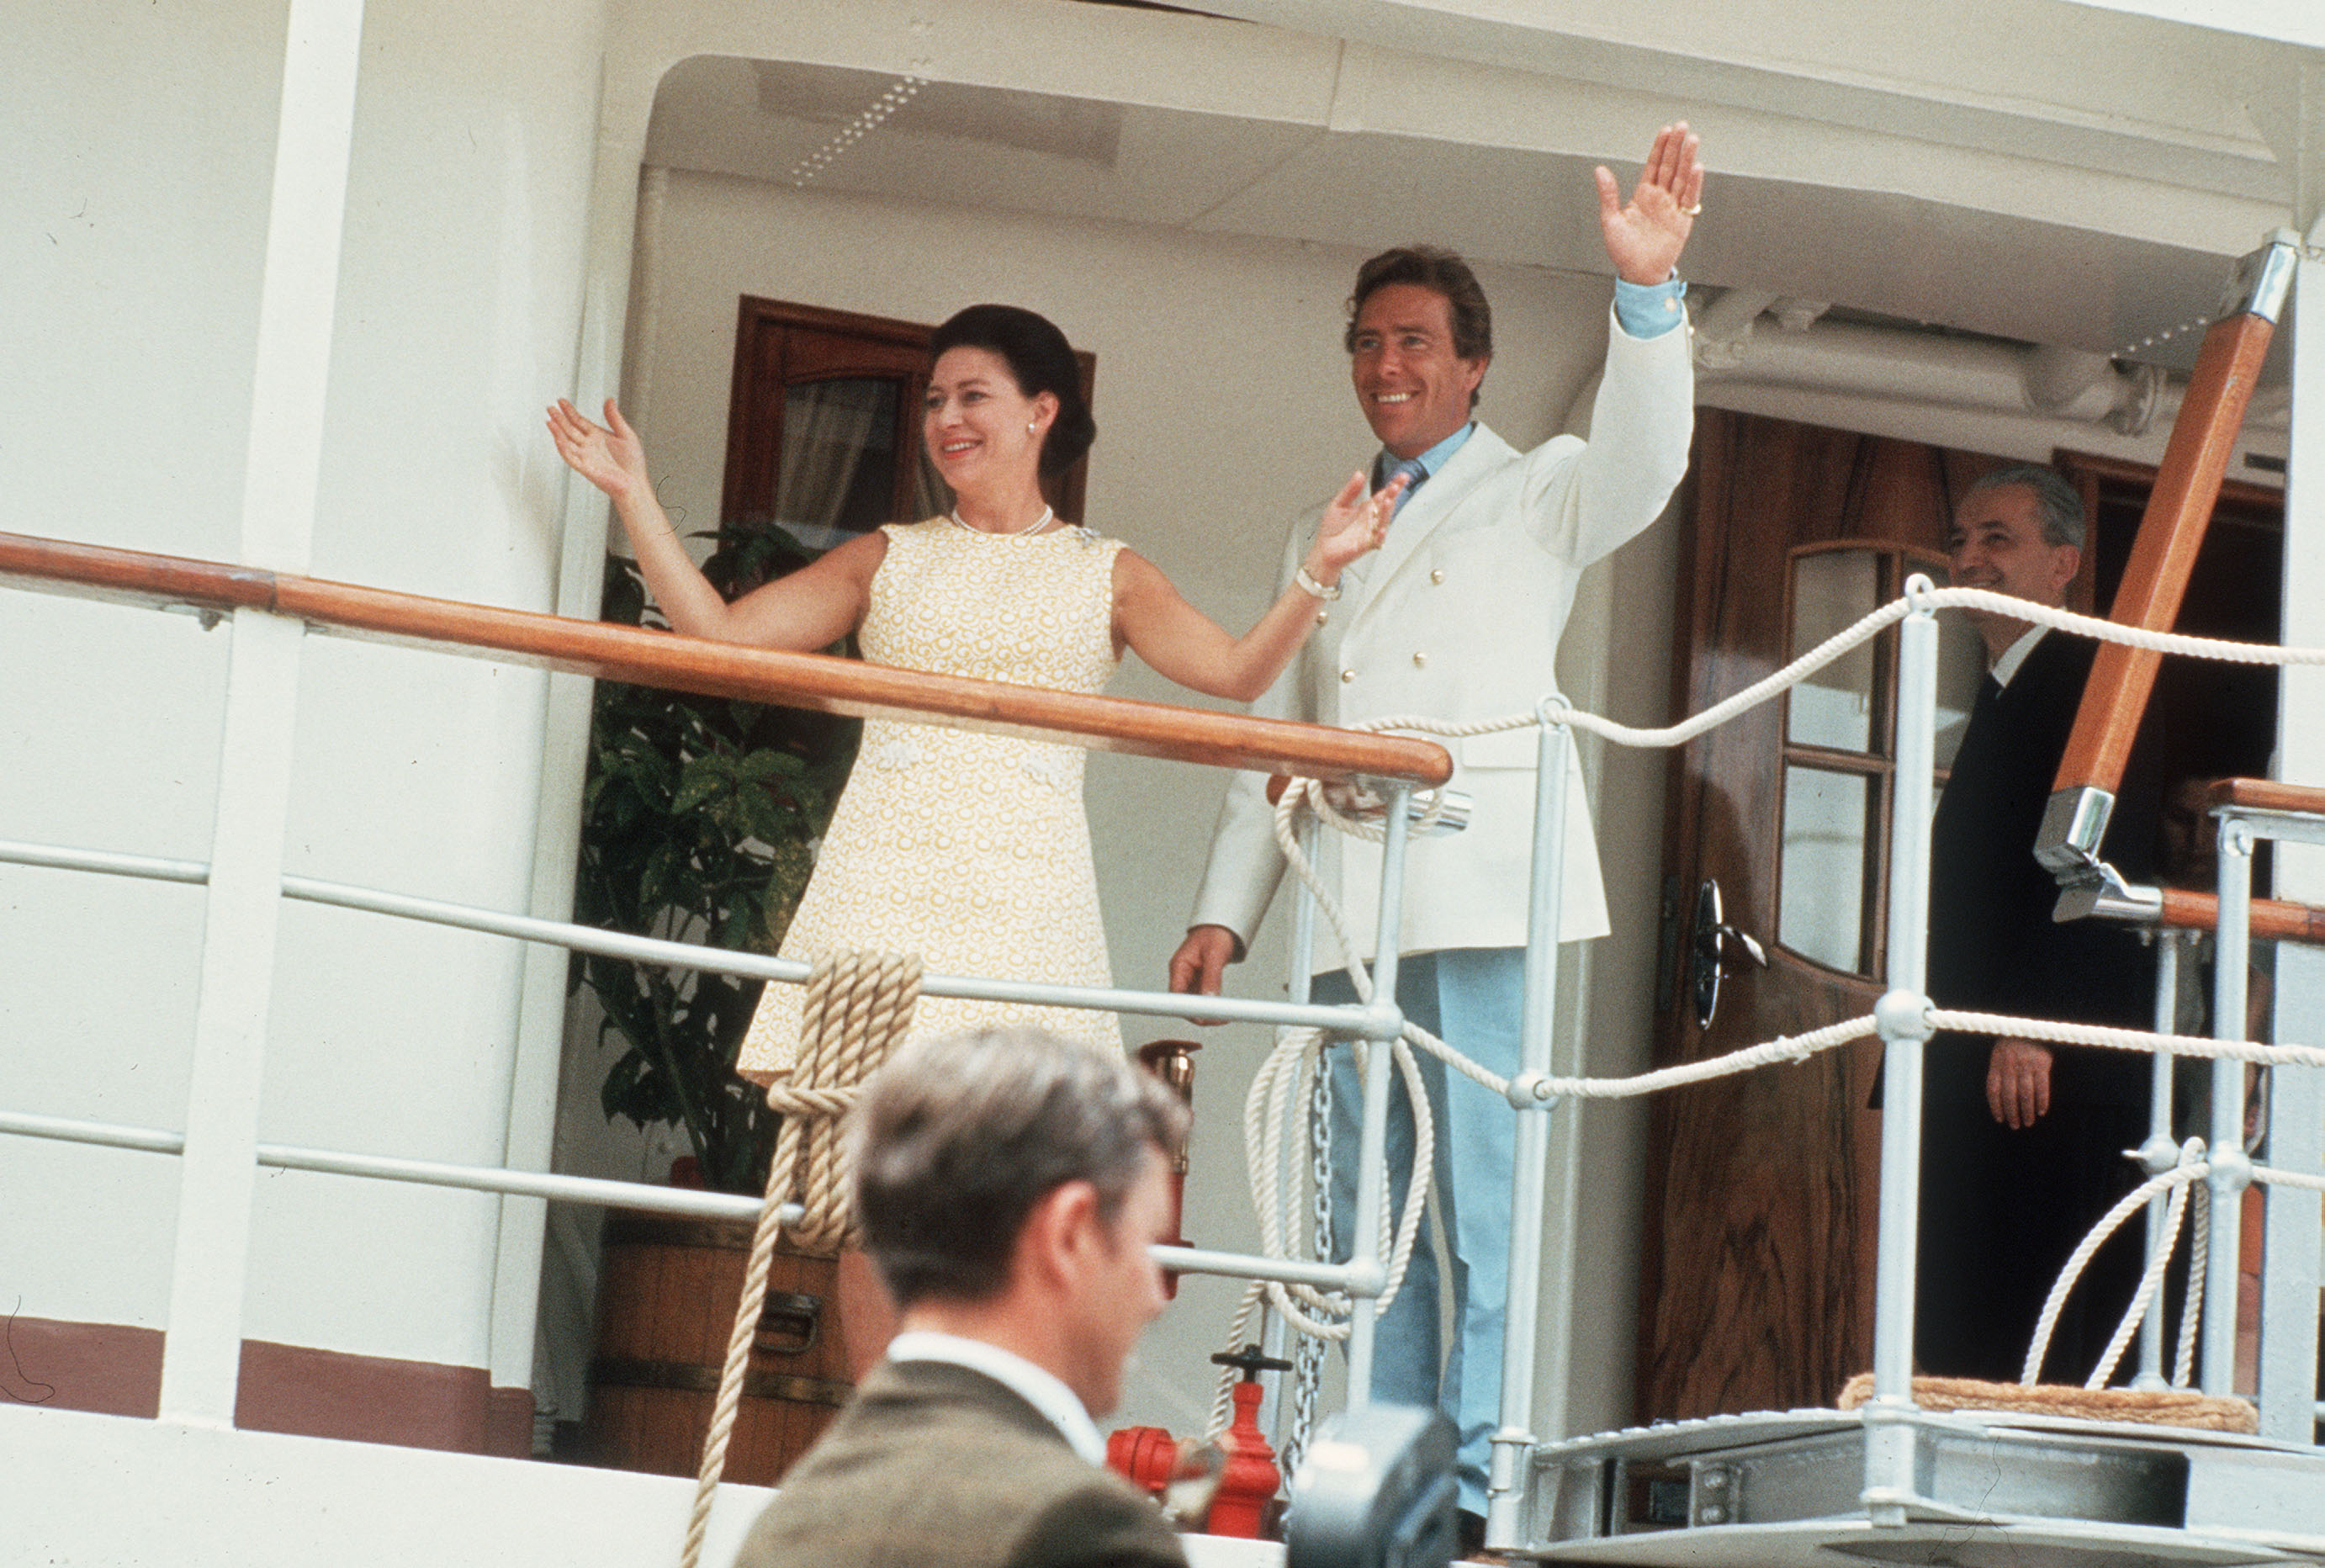 The couple wave from the deck of the Royal Yacht Britannia during their Caribbean honeymoon cruise in the West Indies in 1960